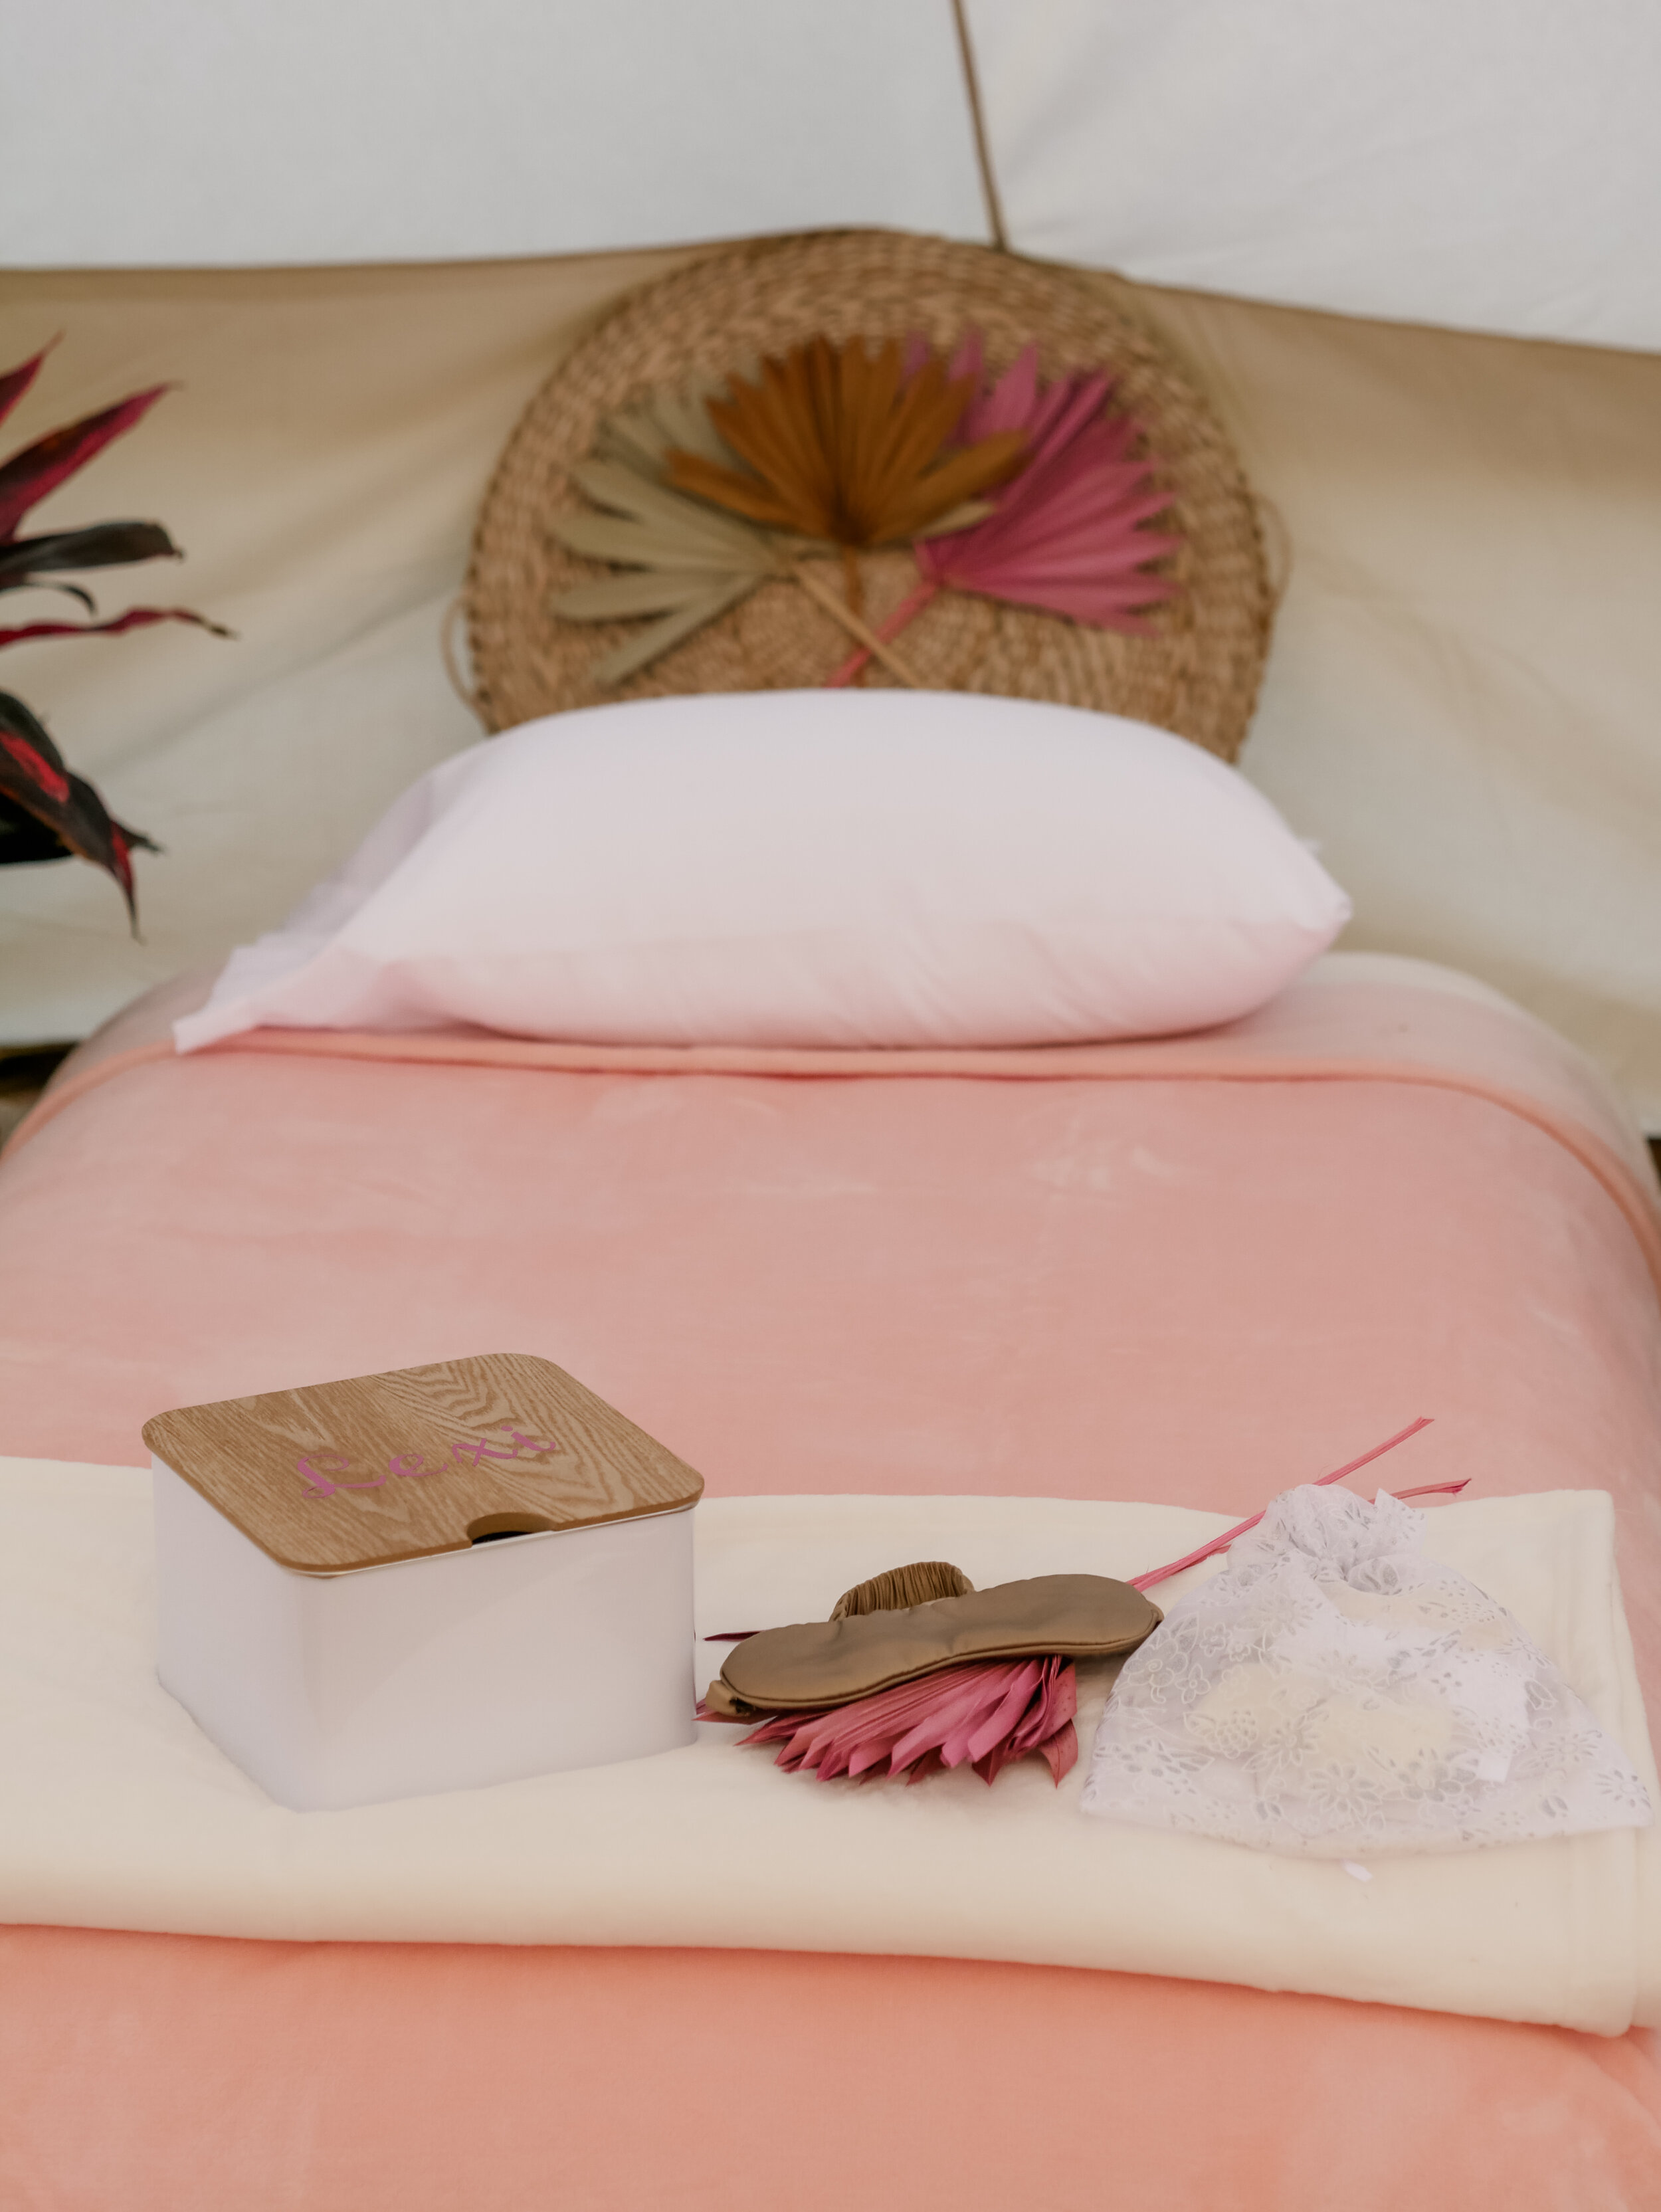  Boho Chic luxury backyard Glamping experience slumber party kit - with large rentable tent and picnic area from MINT Event Design in Austin, TX! Perfect for teen slumber parties, birthday parties, or bachelorette parties. See how event designer Caro